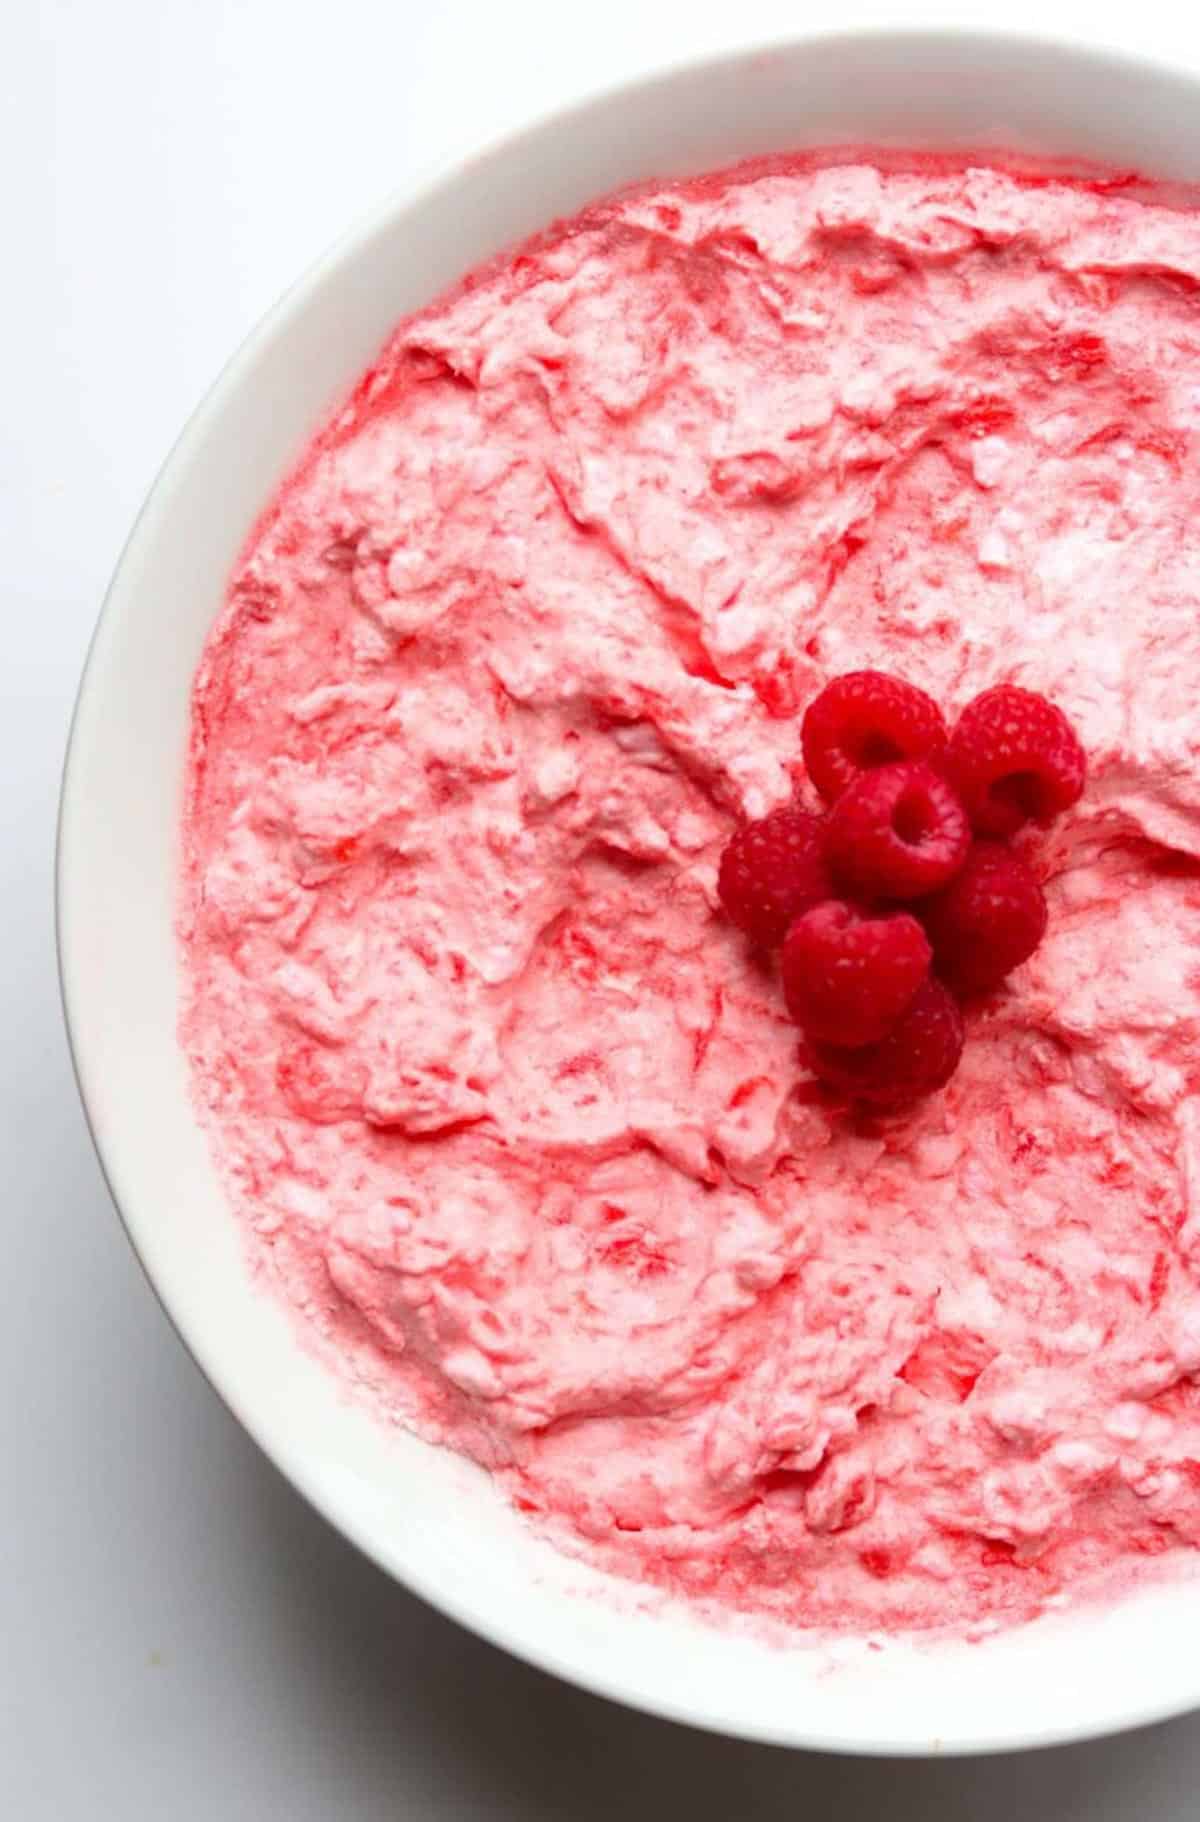 Large white bowl of raspberry jello salad with raspberries on top